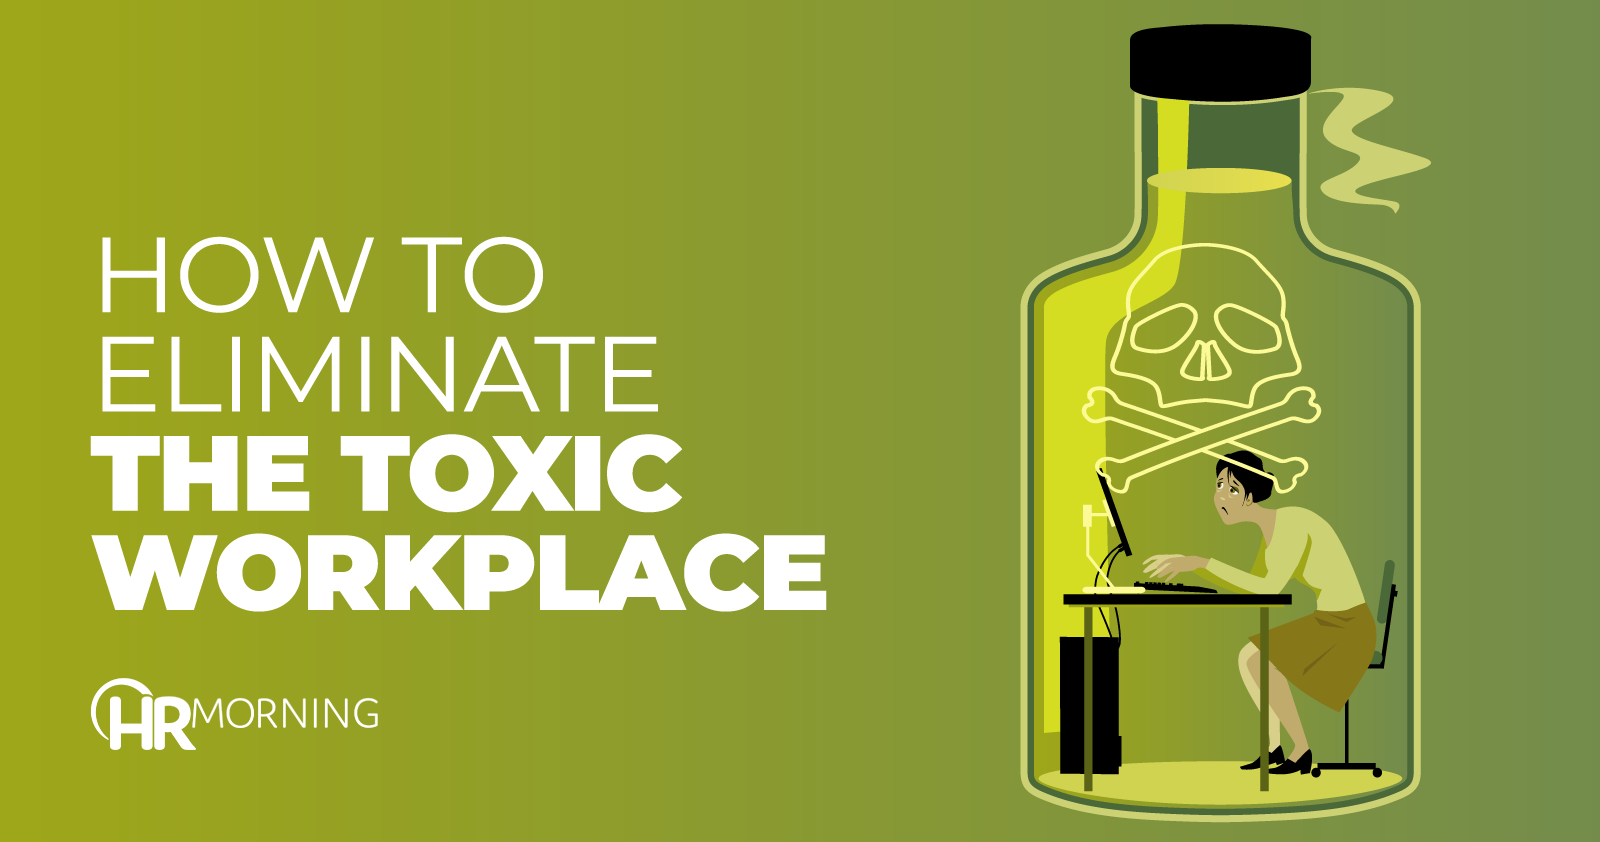 How To Eliminate The Toxic Workplace